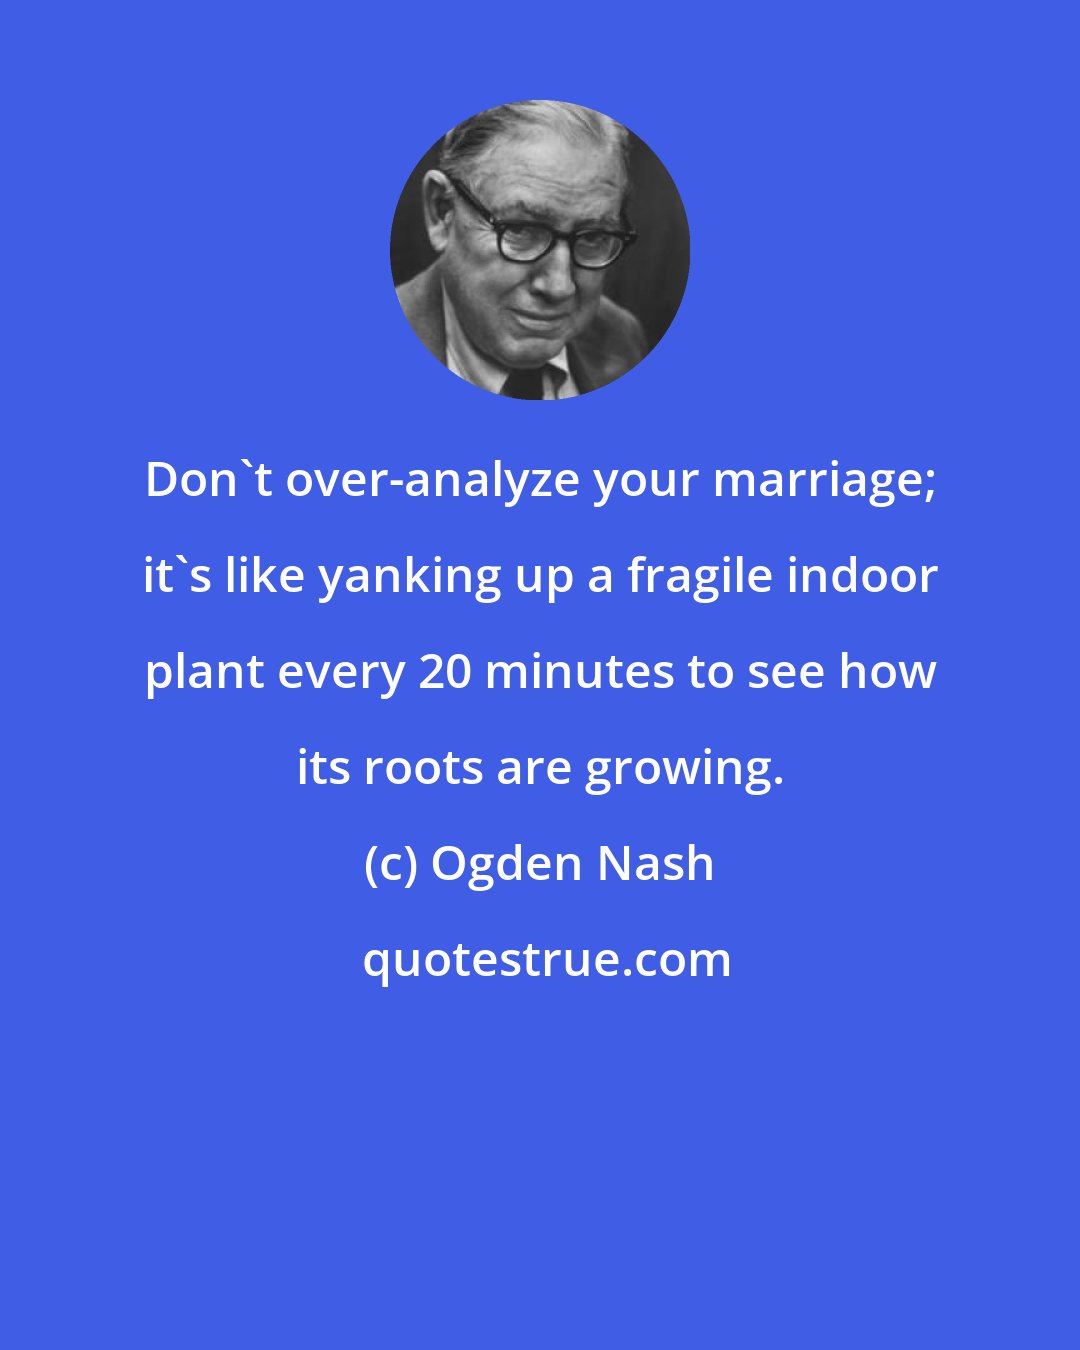 Ogden Nash: Don't over-analyze your marriage; it's like yanking up a fragile indoor plant every 20 minutes to see how its roots are growing.